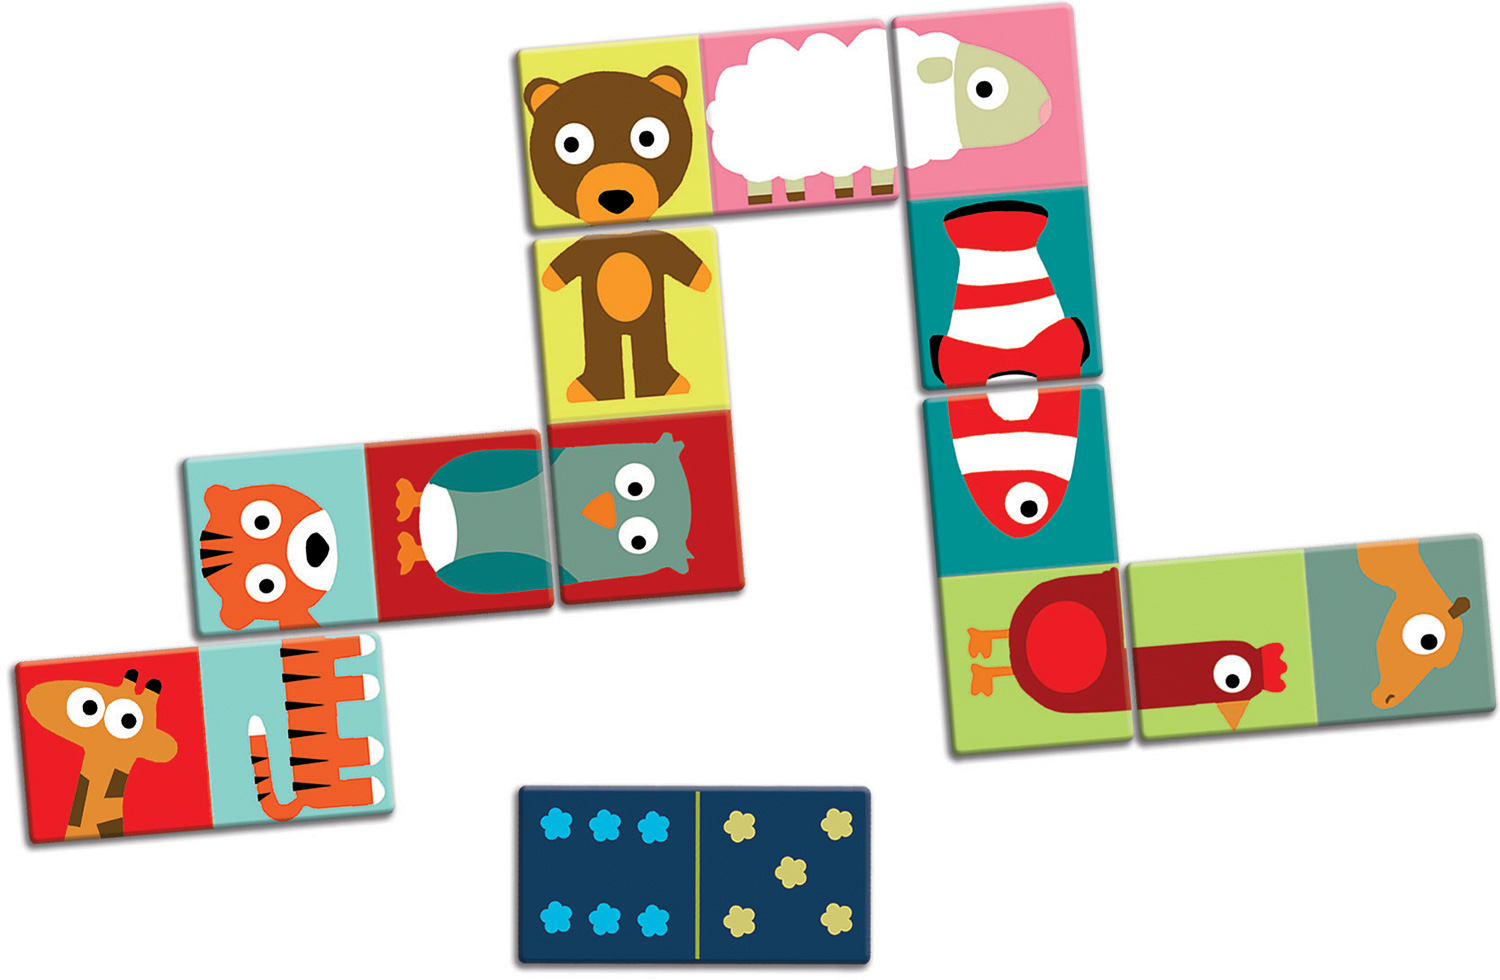 Ellende Politiek muis My First Games Animo-Puzzle Domino - Snickelfritz Toys